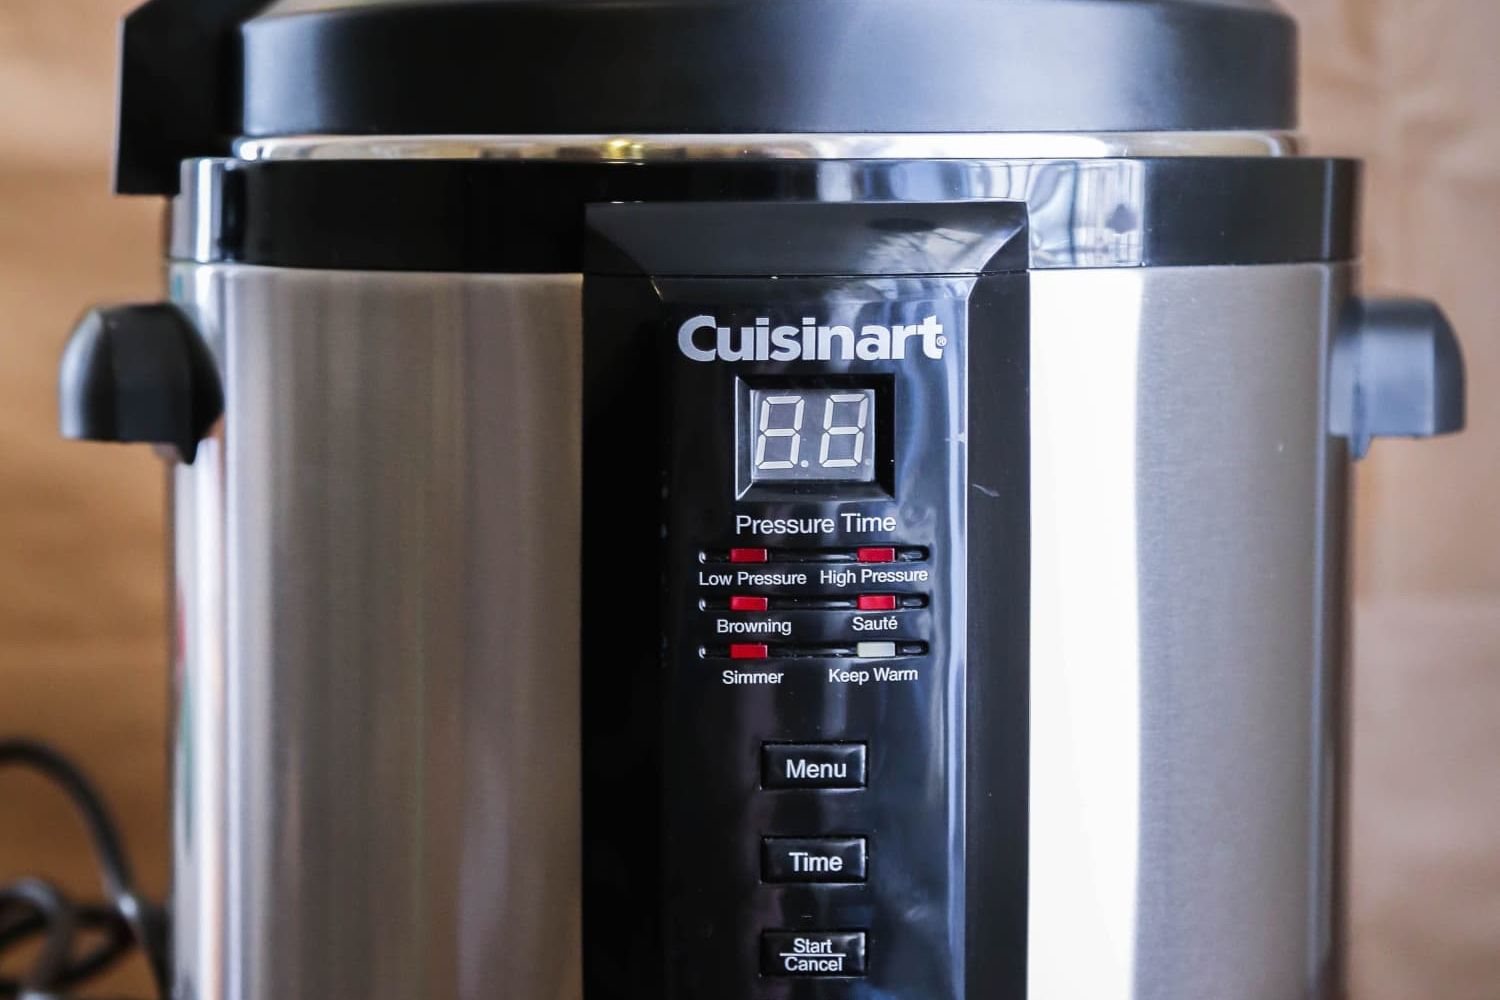 Cuisinart Electric Pressure Cooker Beeps When Plugged In